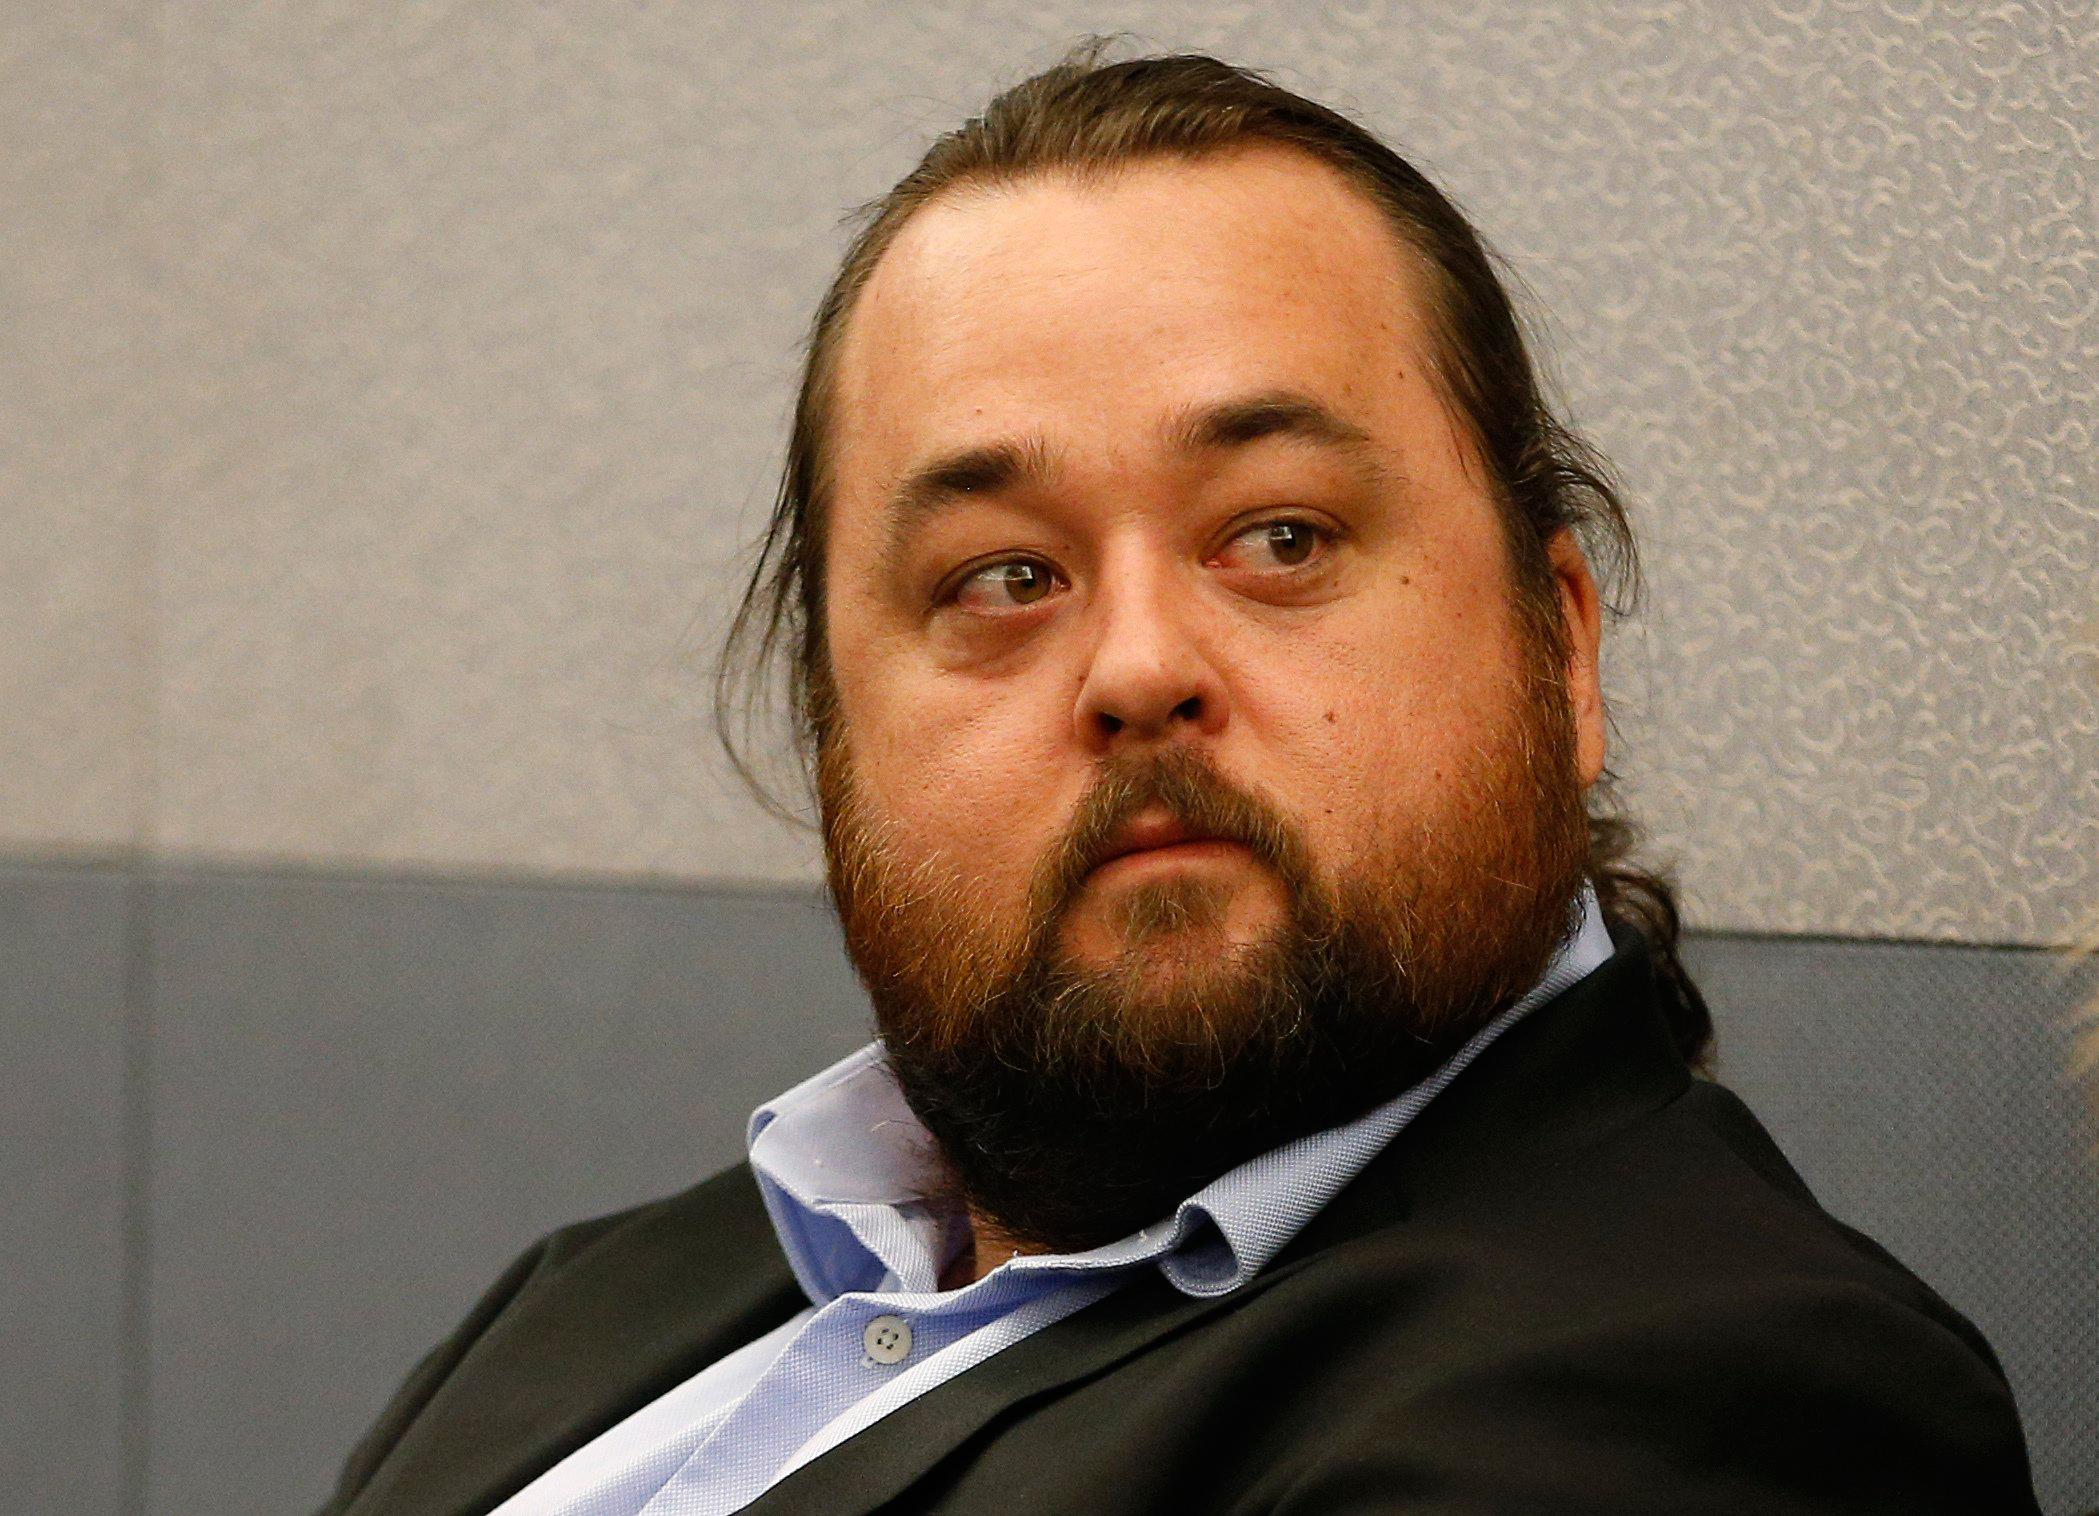 Austin Lee Russell, better known as Chumlee from the TV series "Pawn Stars," appears in court Monday, May 23, 2016, in Las Vegas. Russell and his lawyers told a Las Vegas judge he intends to plead guilty in state court to felony weapon and misdemeanor attempted drug possession charges. (AP Photo/John Locher)